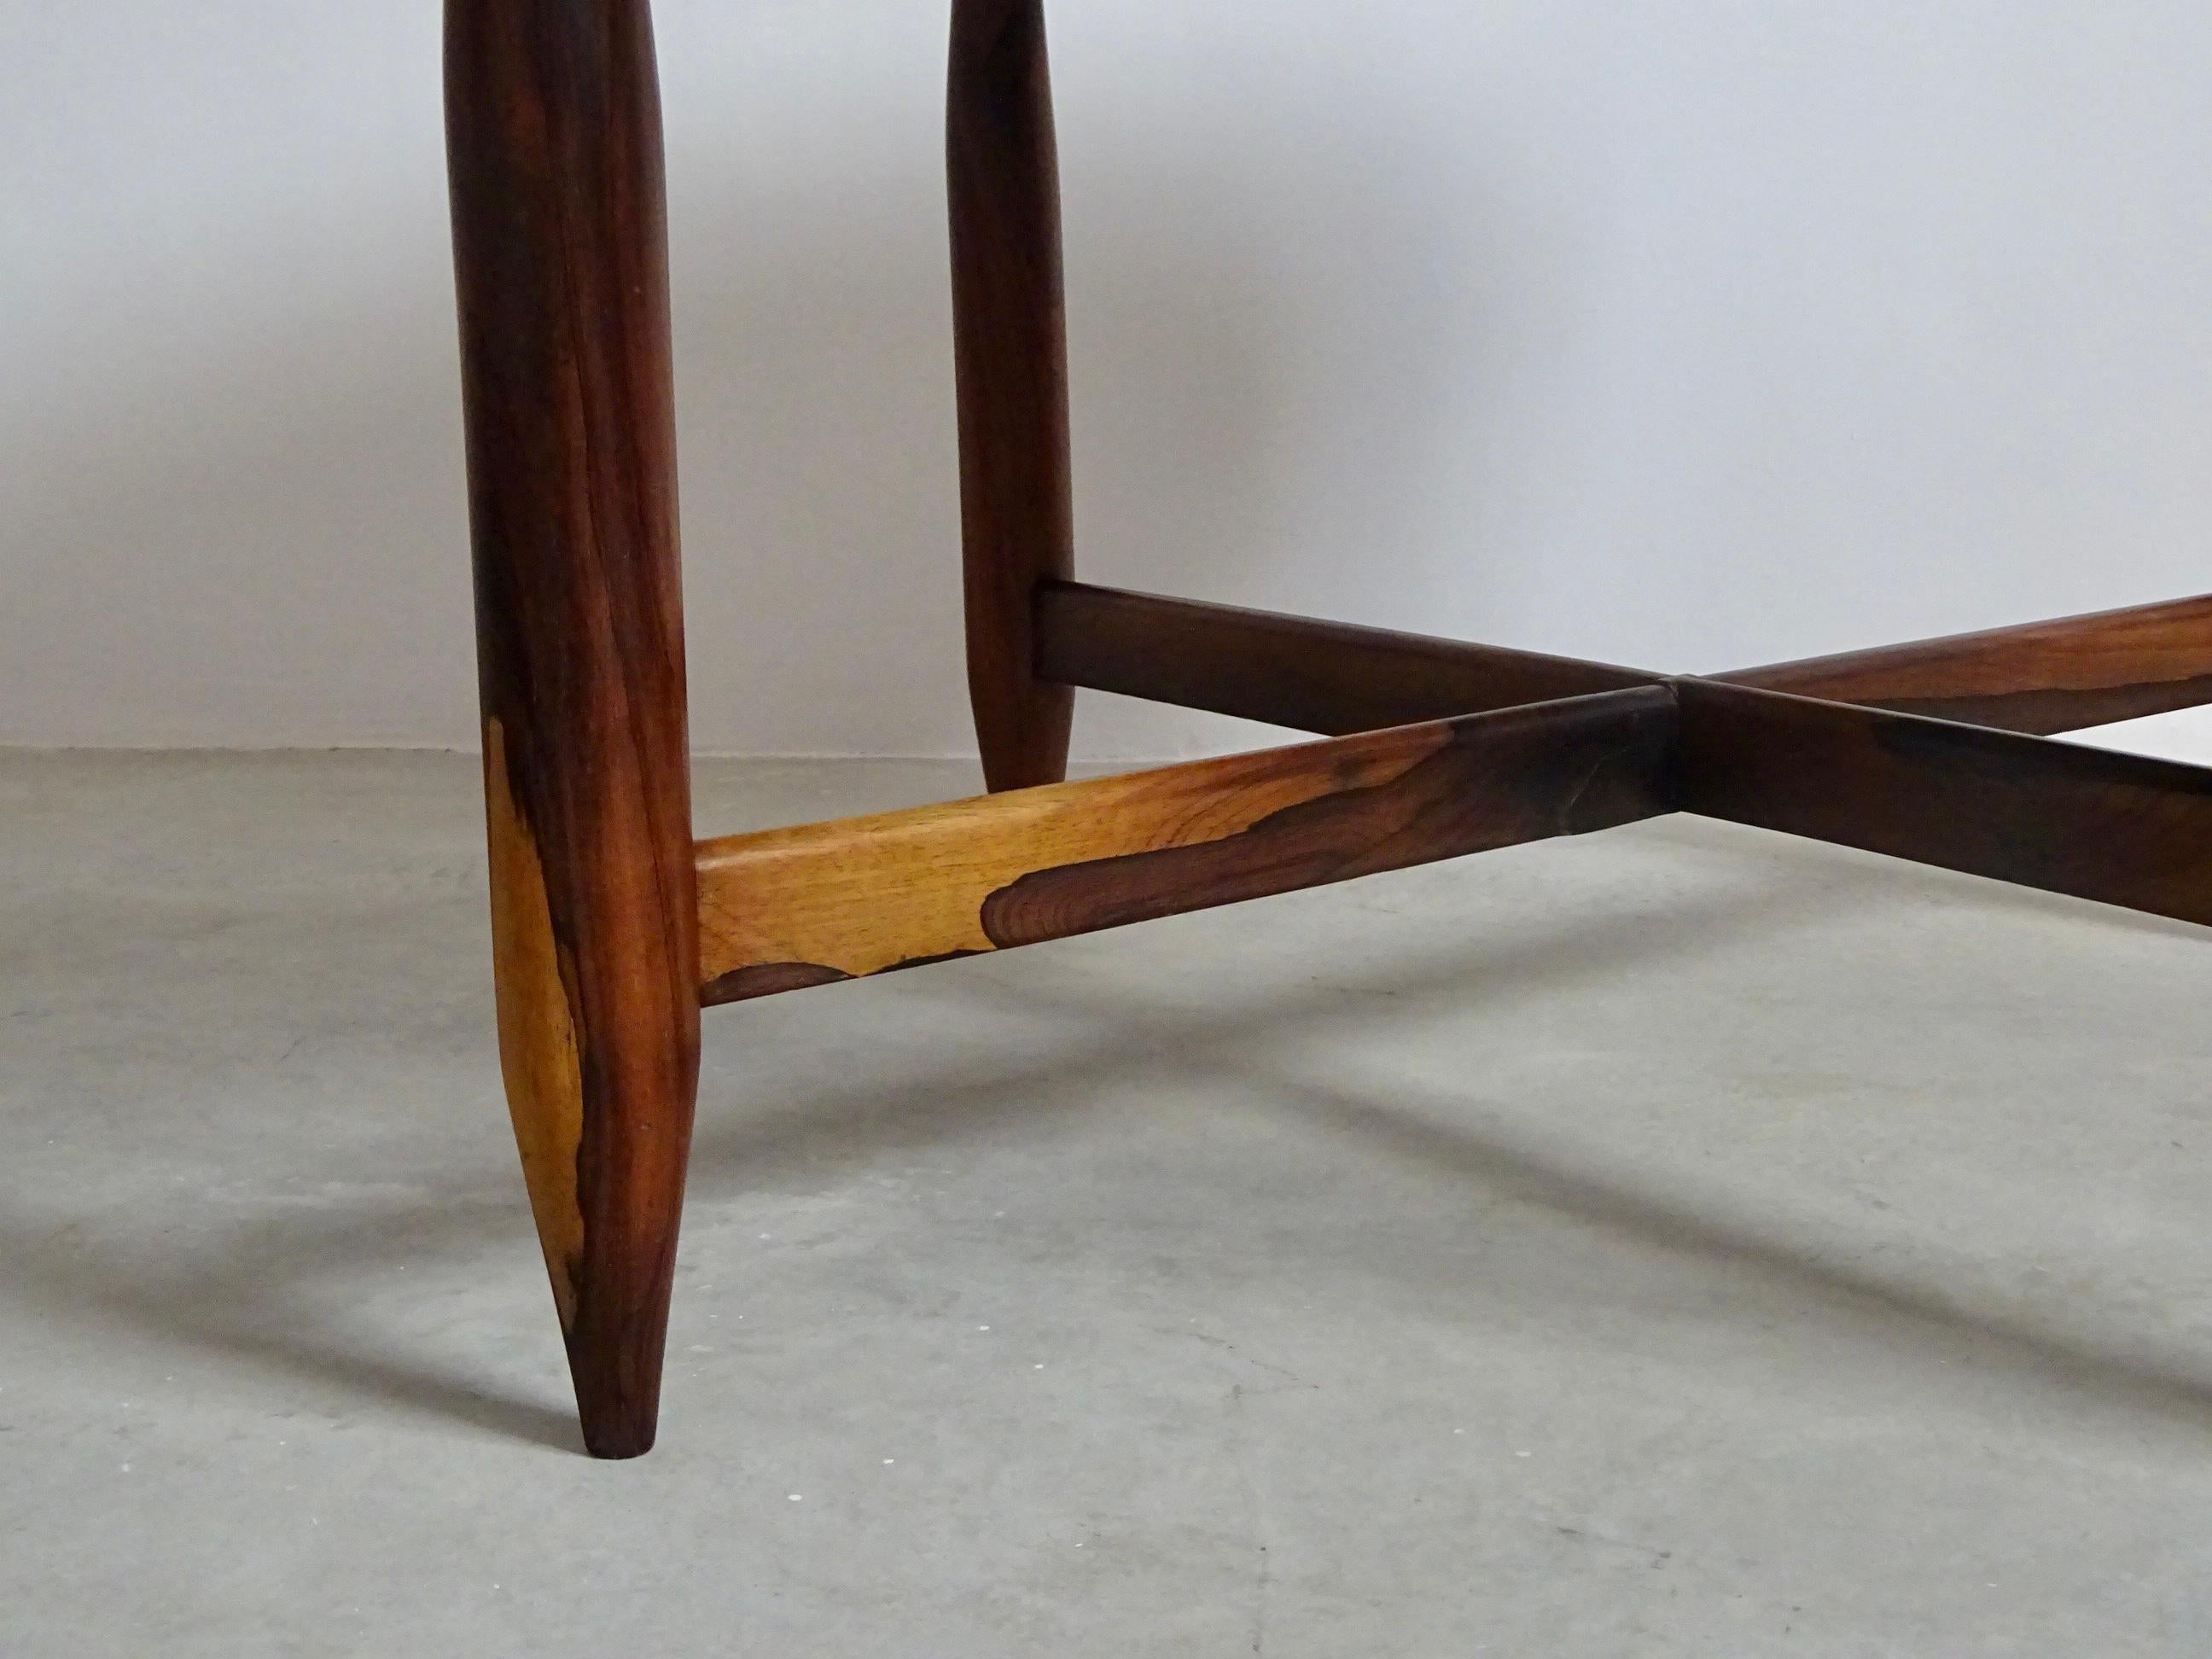 Brazilian Mid-Century Modern Dining Table by Jorge Jabour Mauad, Brazil, 1960s For Sale